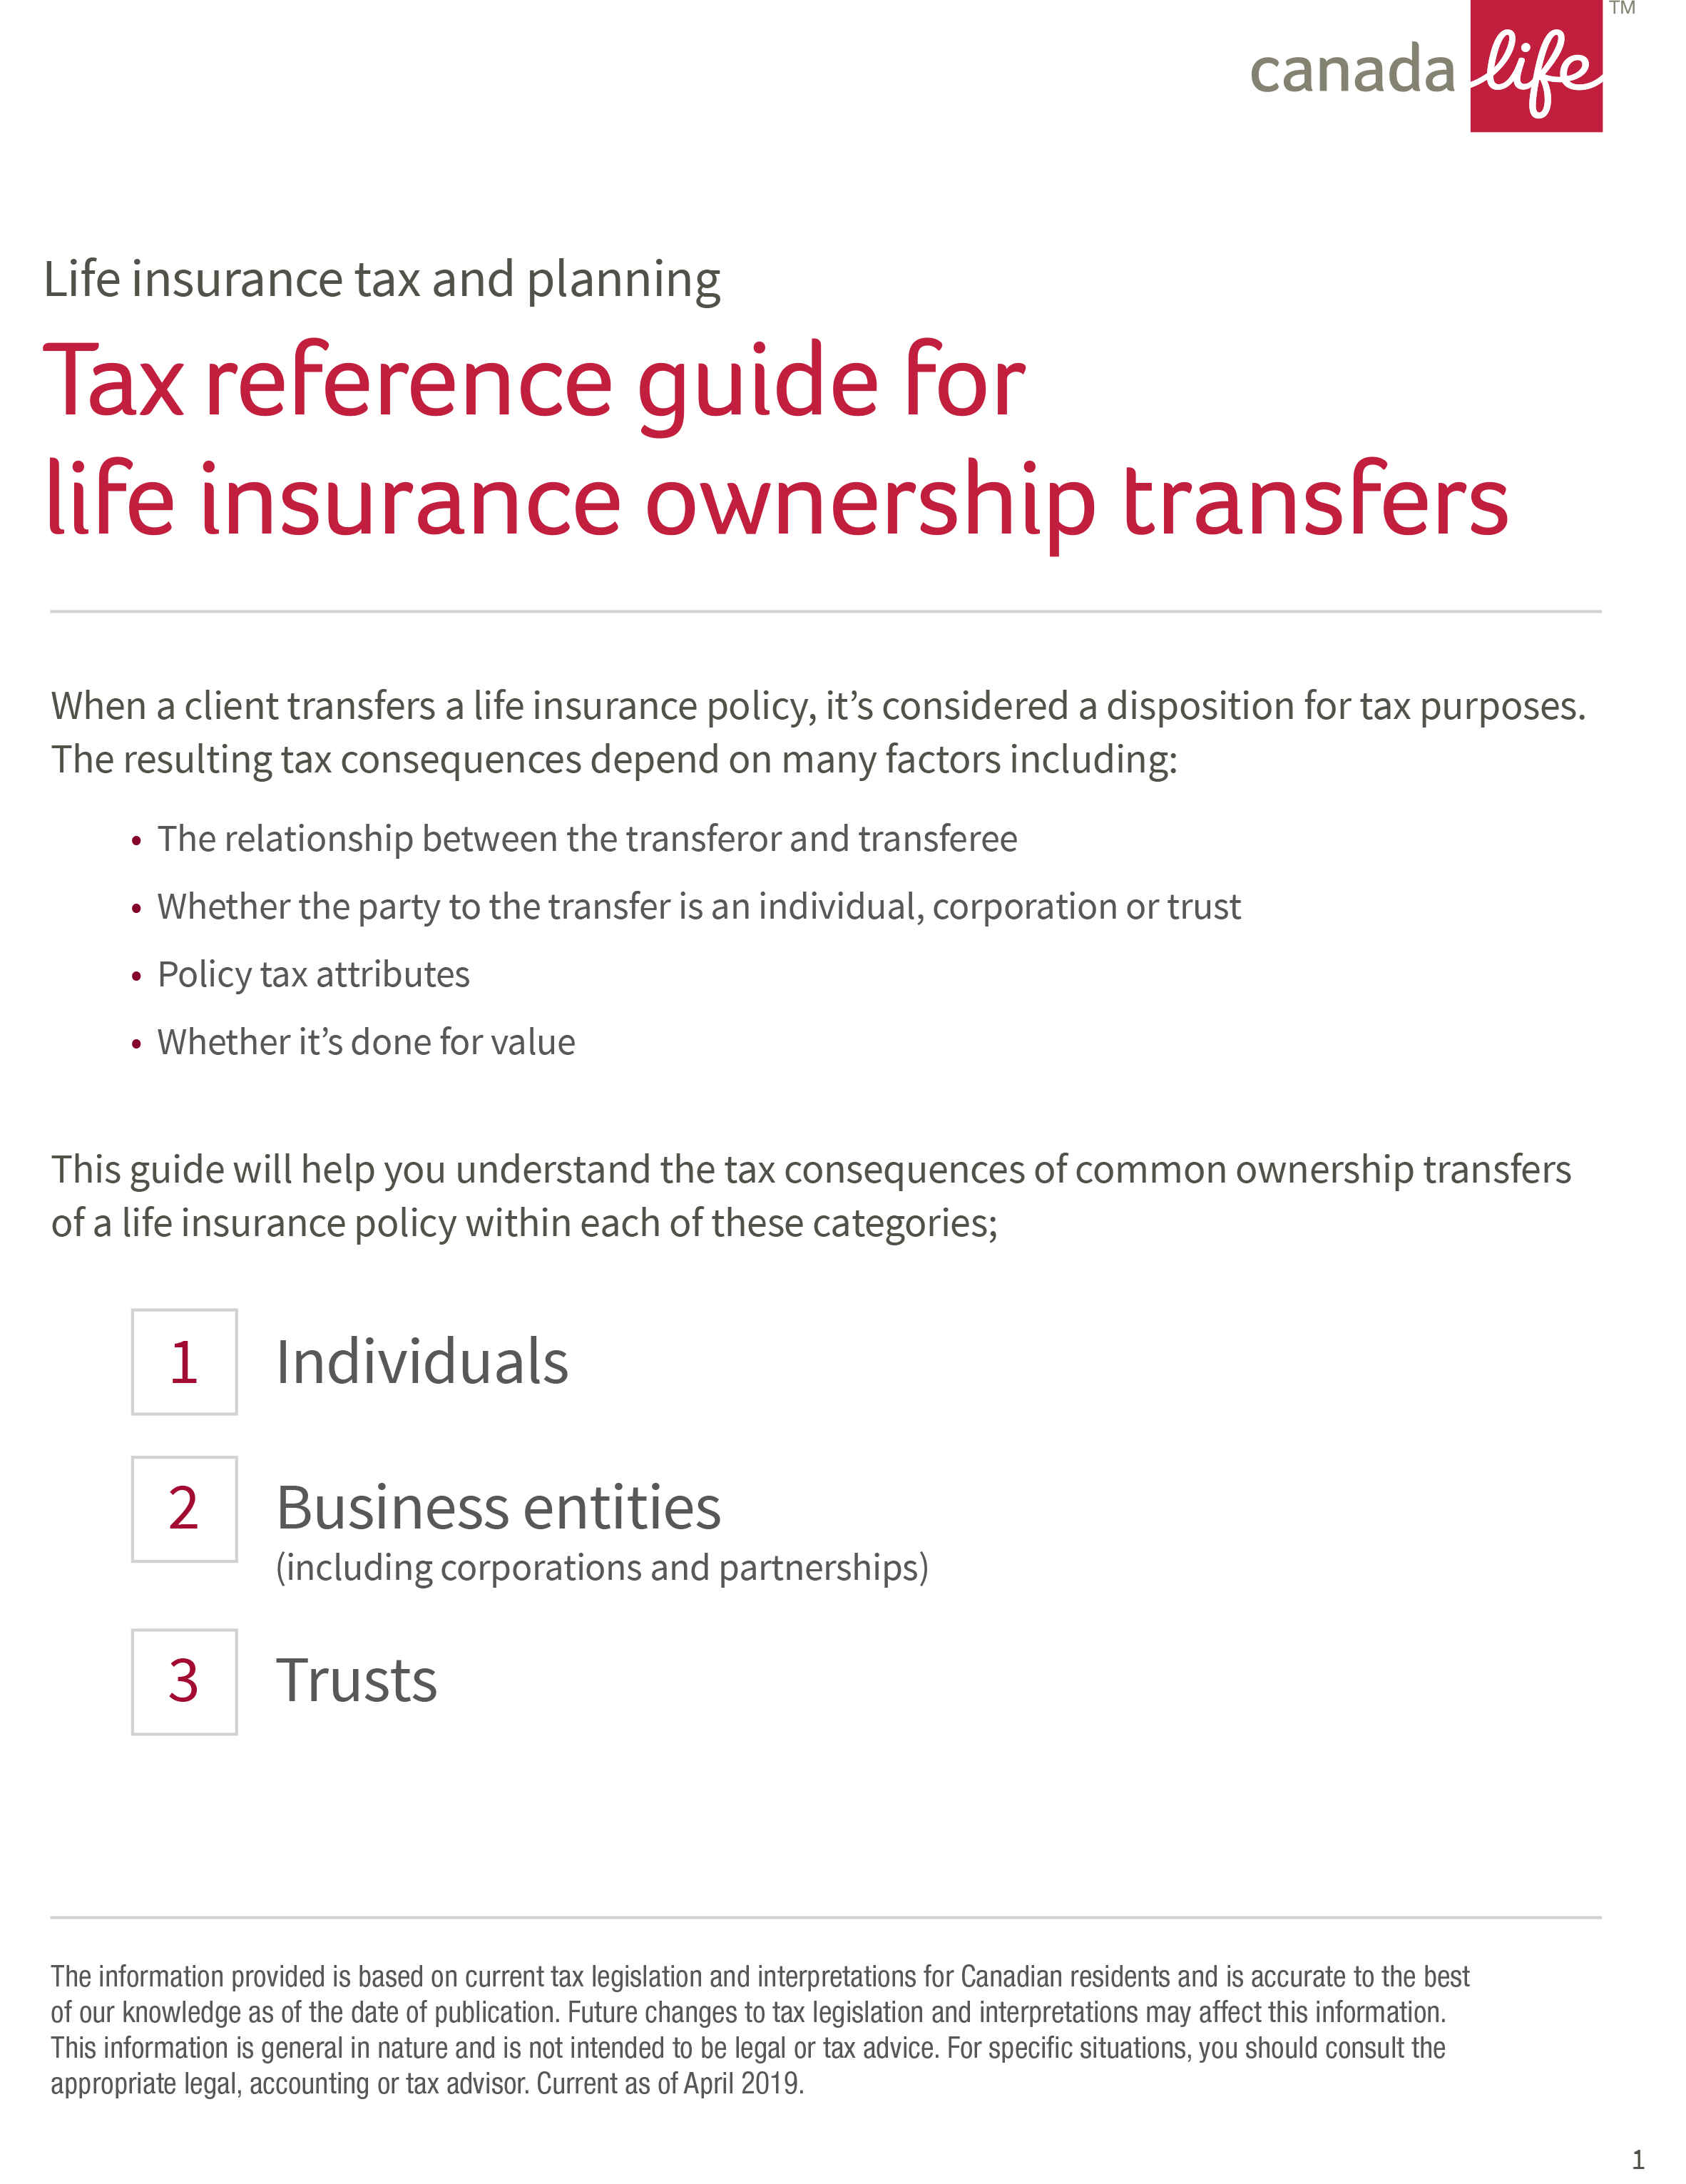 Tax guide for transferring a life insurance policy image